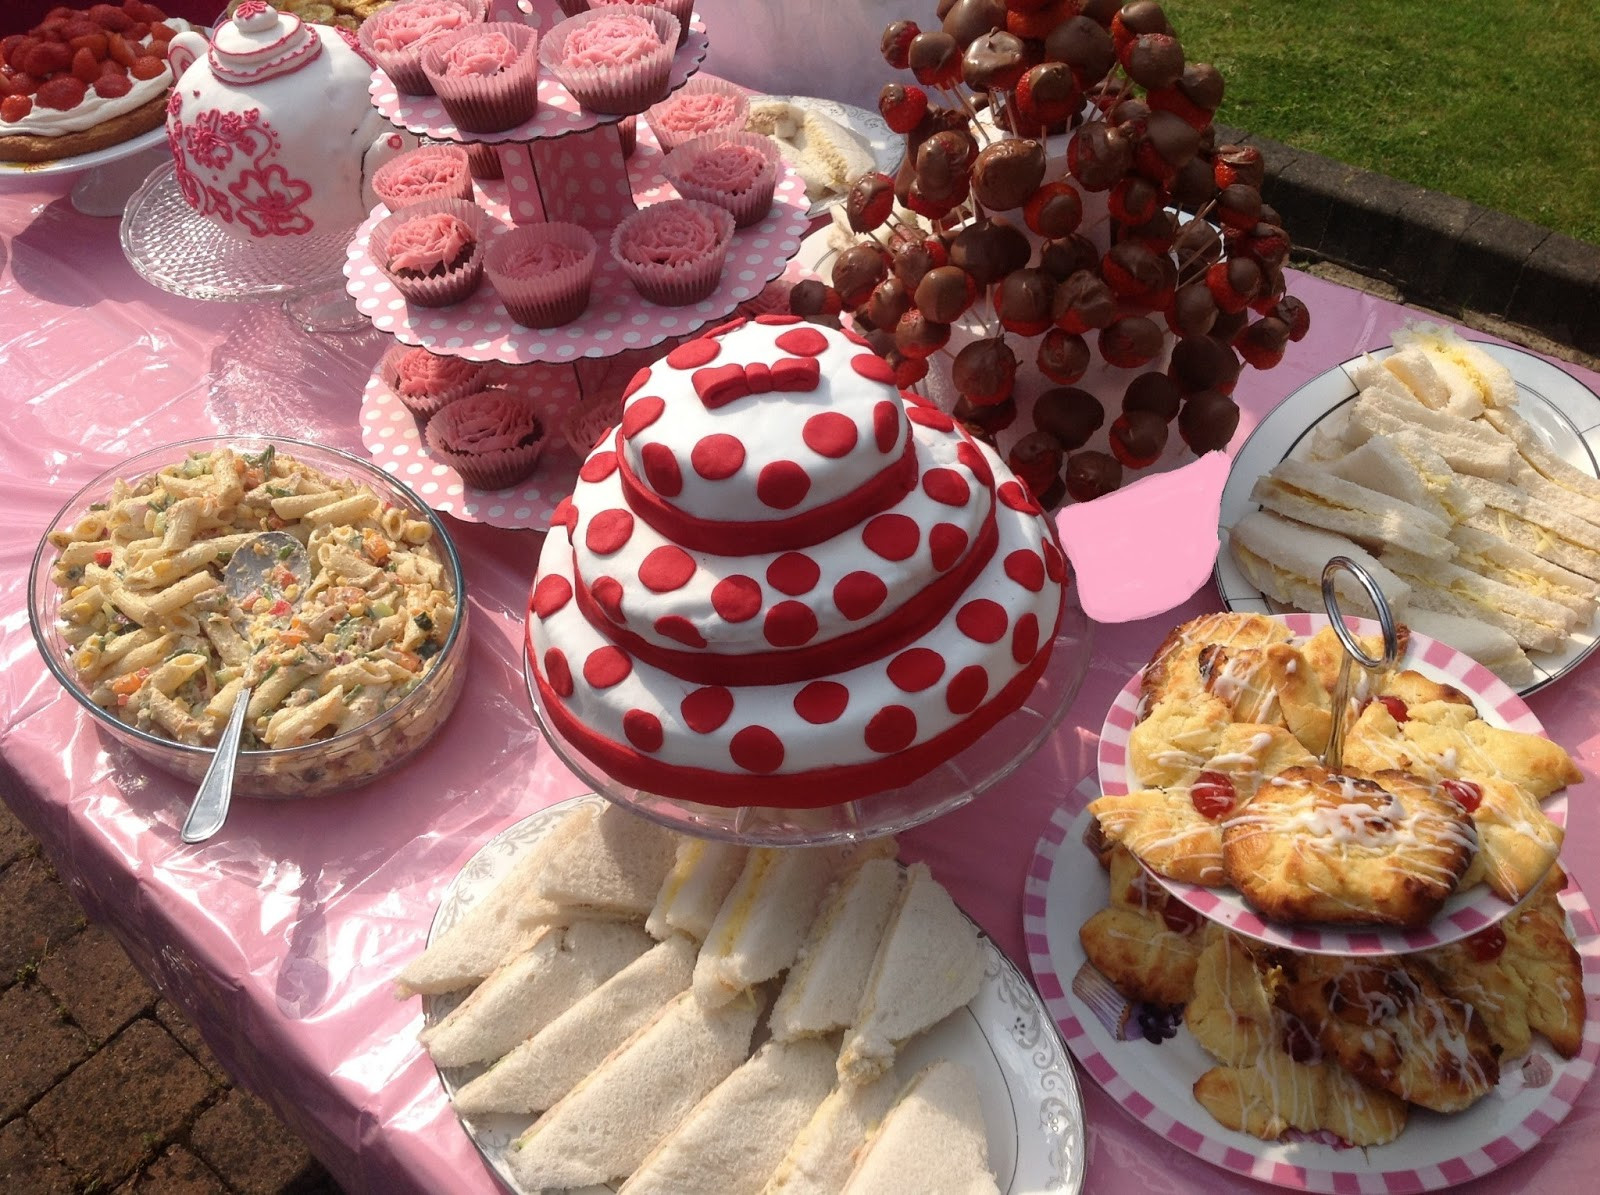 Summer Afternoon Tea Party Ideas
 This Muslim Girl Bakes A Summer Afternoon Tea